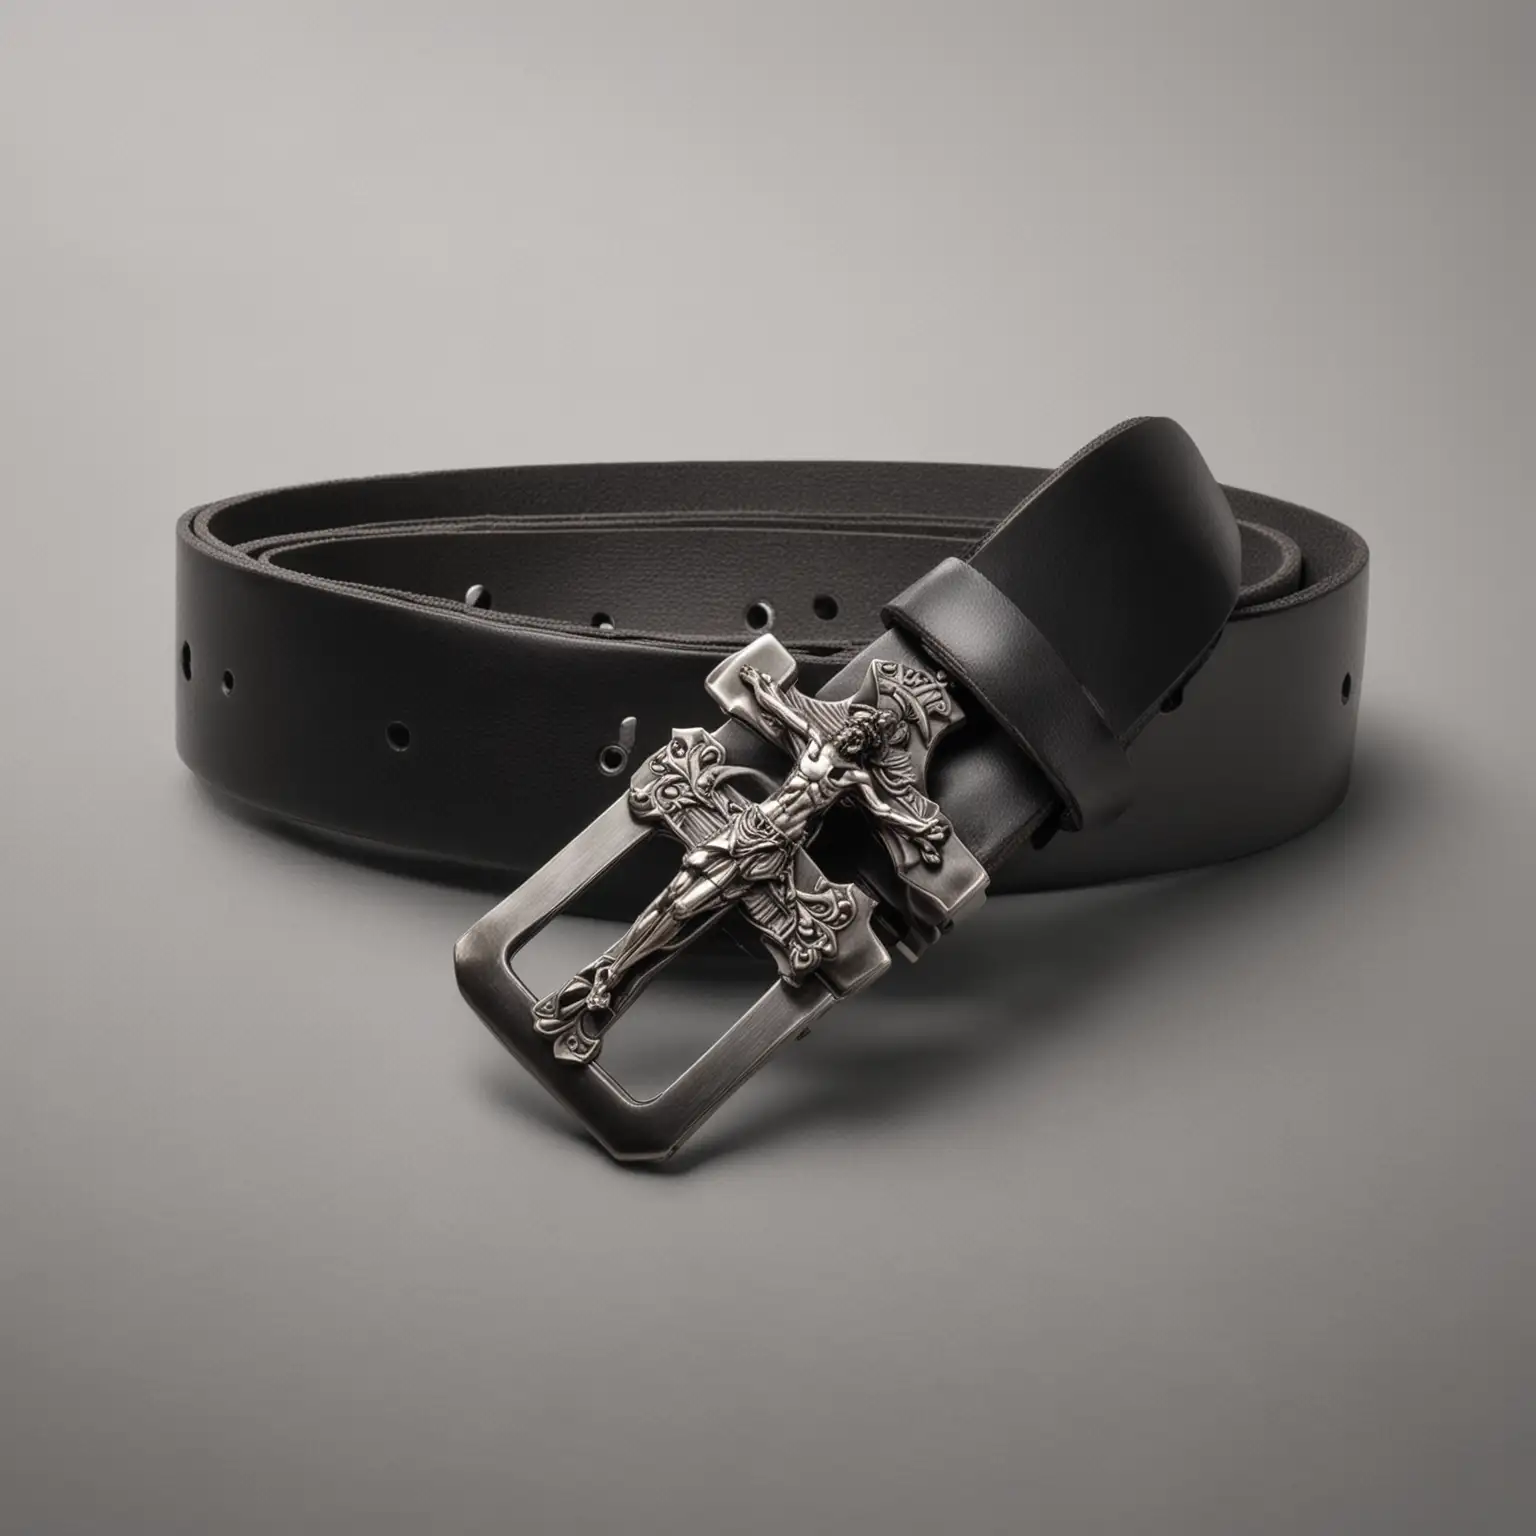 a man's black leather belt lying in a long loop on a white background
belt buckle prong is a simple crucifix 